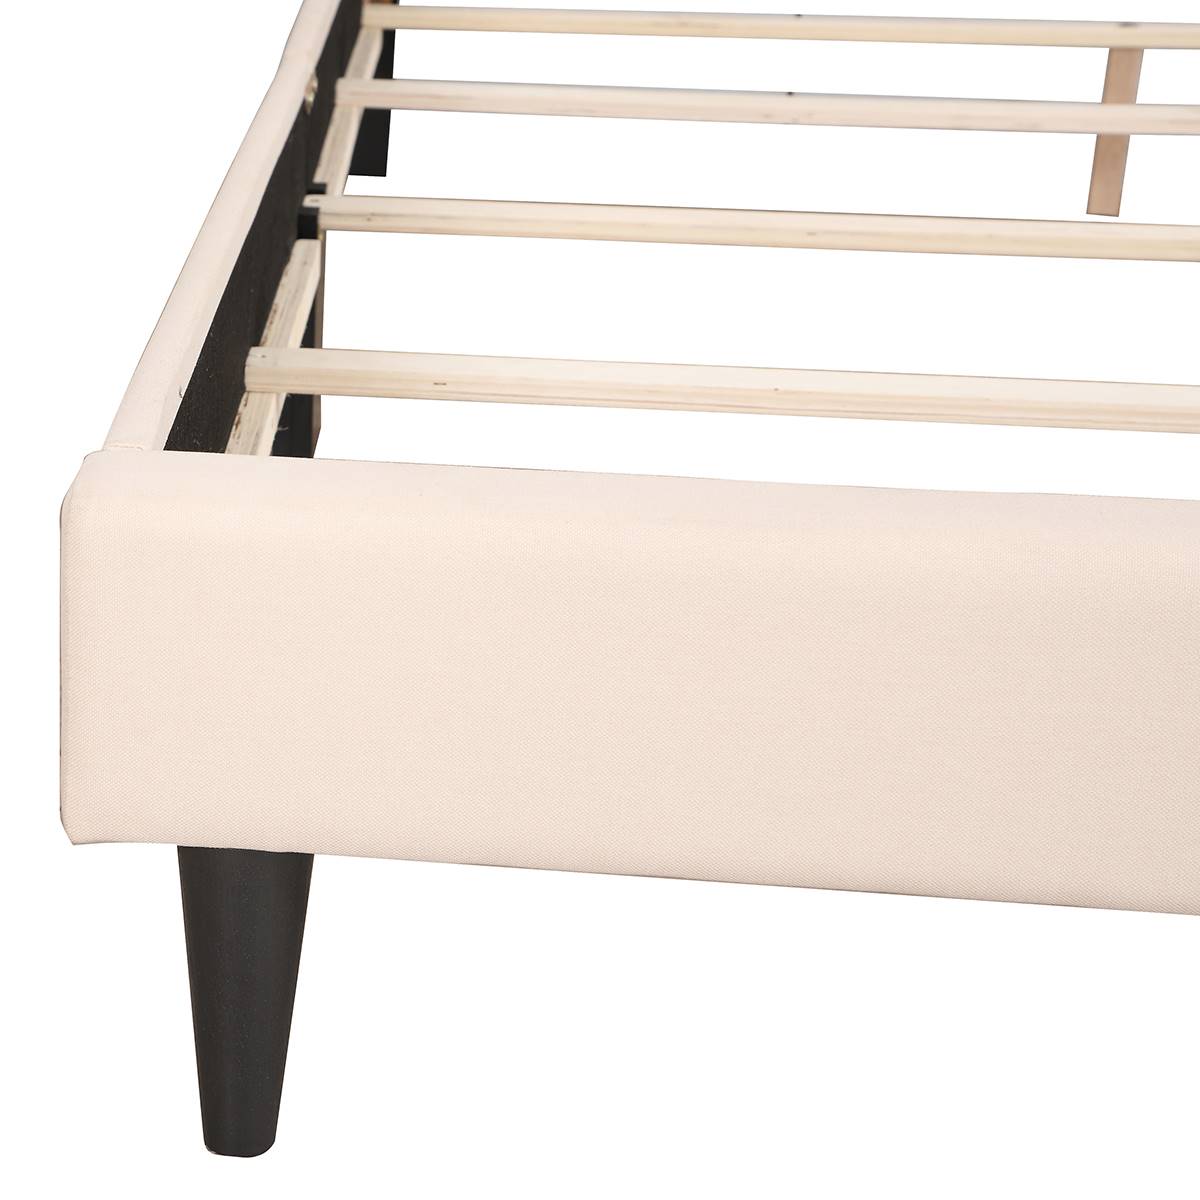 Passion Furniture Deb Adjustable Panel Bed Frame - Queen